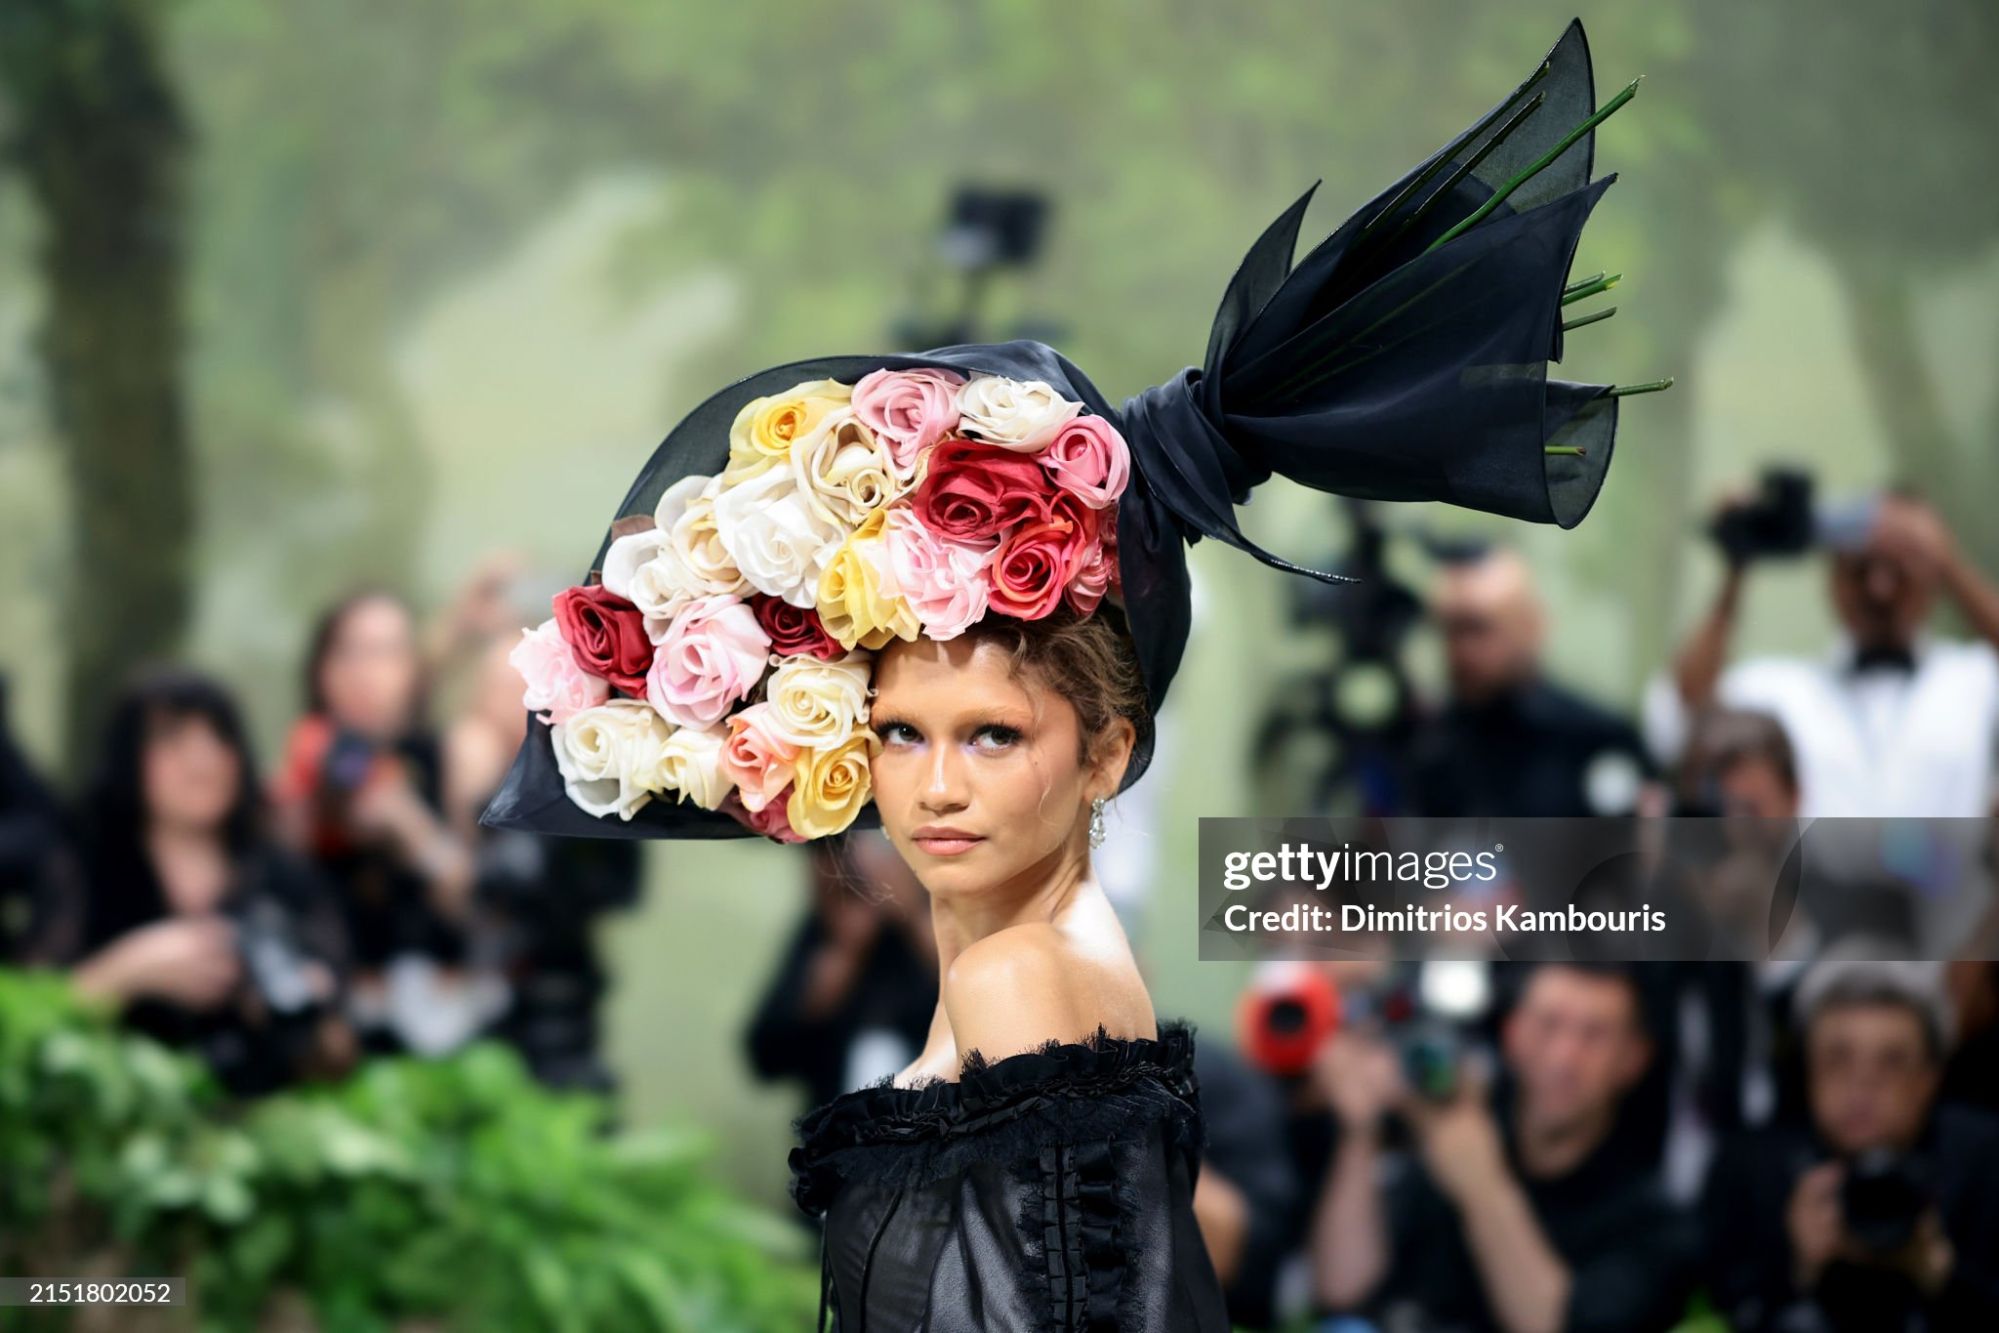 gettyimages-2151802052-2048x2048.jpg